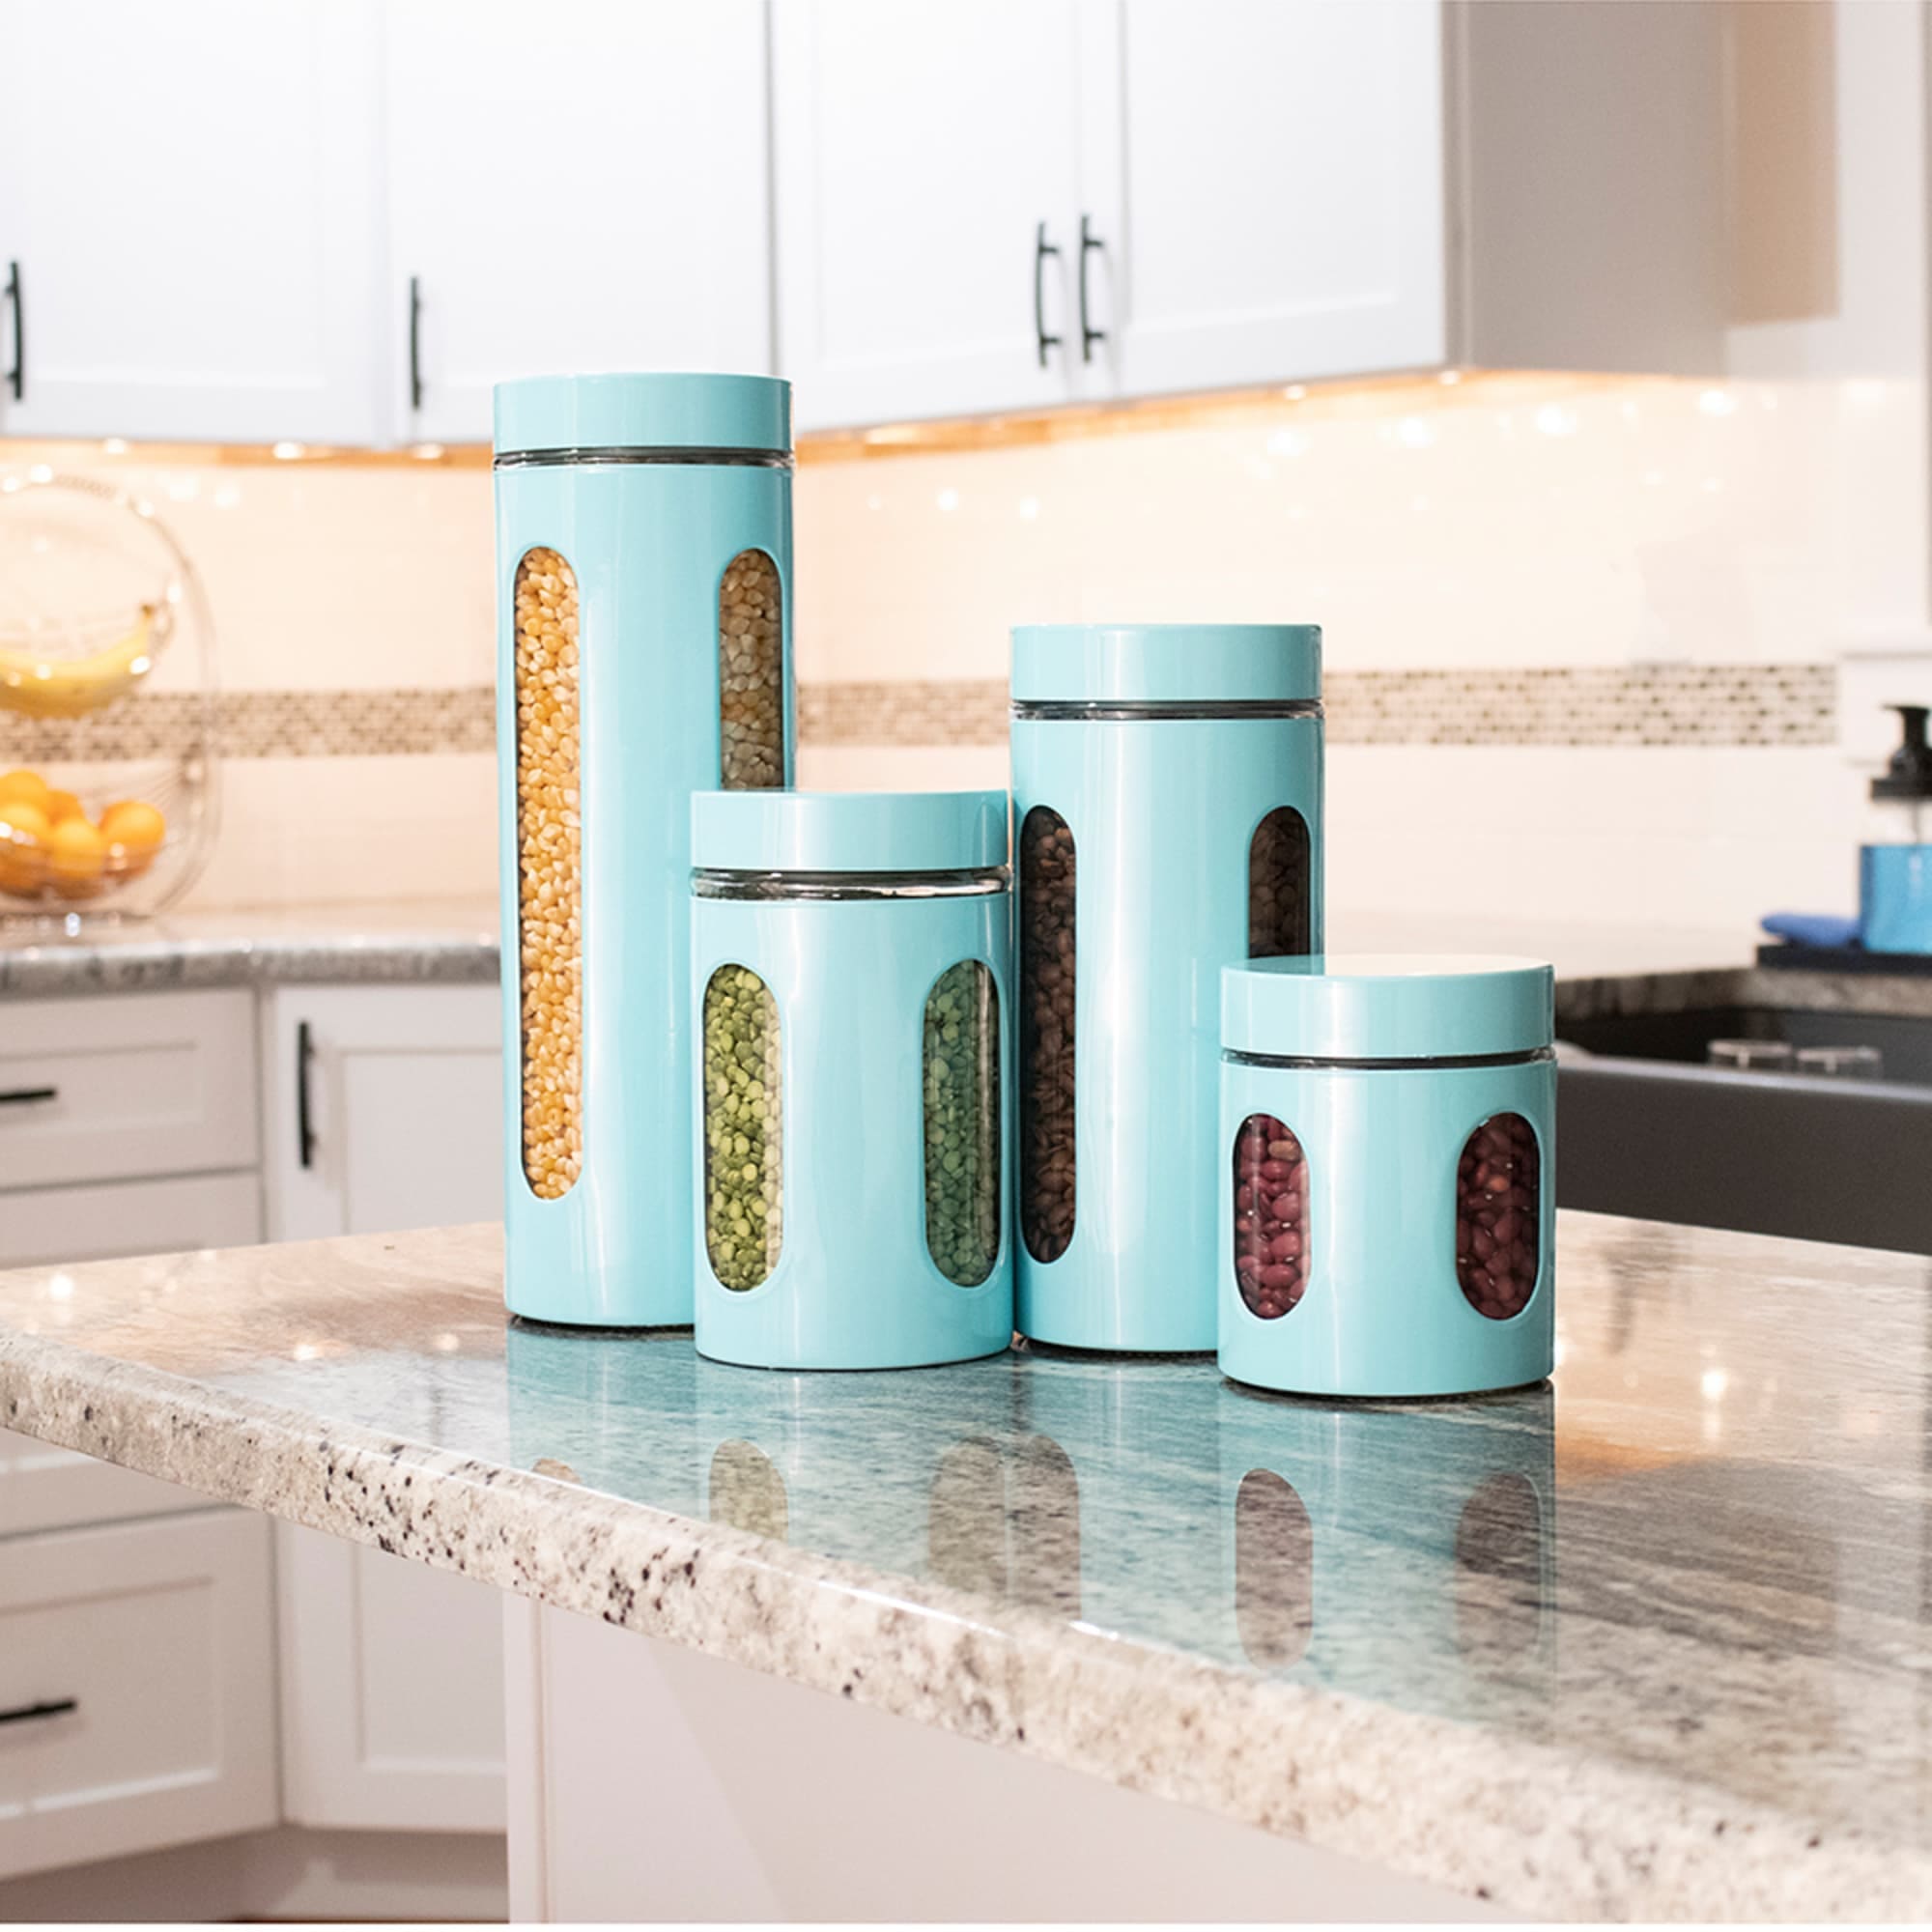 Home Basics 4 Piece Essence Collection Metal Canister Set, Turquoise $12.00 EACH, CASE PACK OF 4